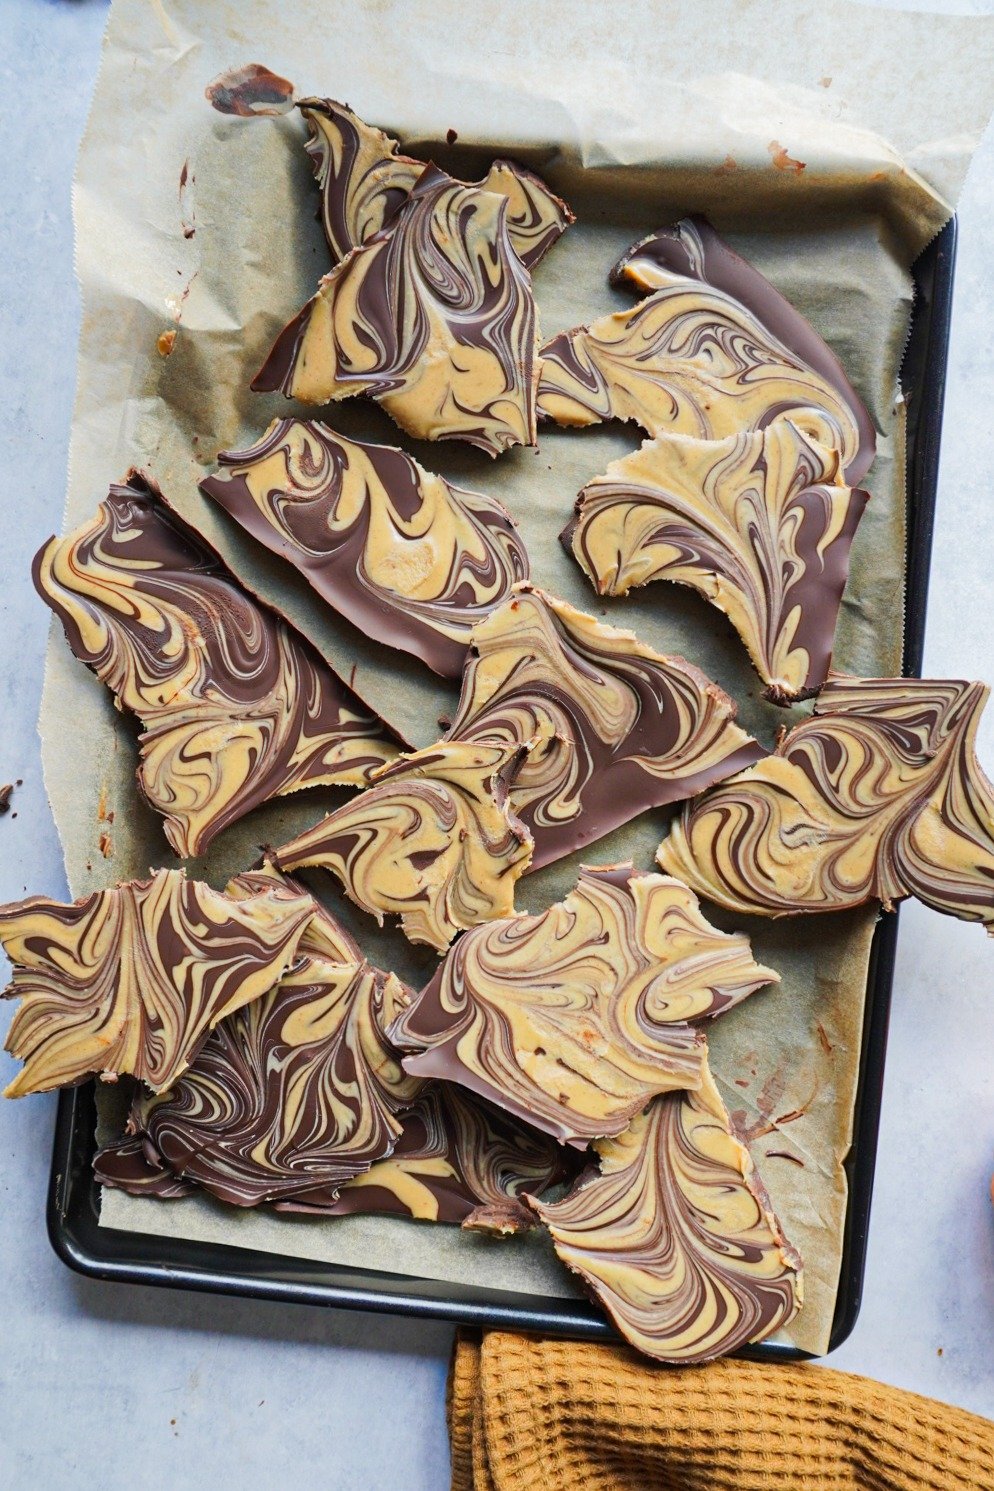 Easy To Make Homemade Chocolate Bark is so delicious, everyone is guaranteed to love it!